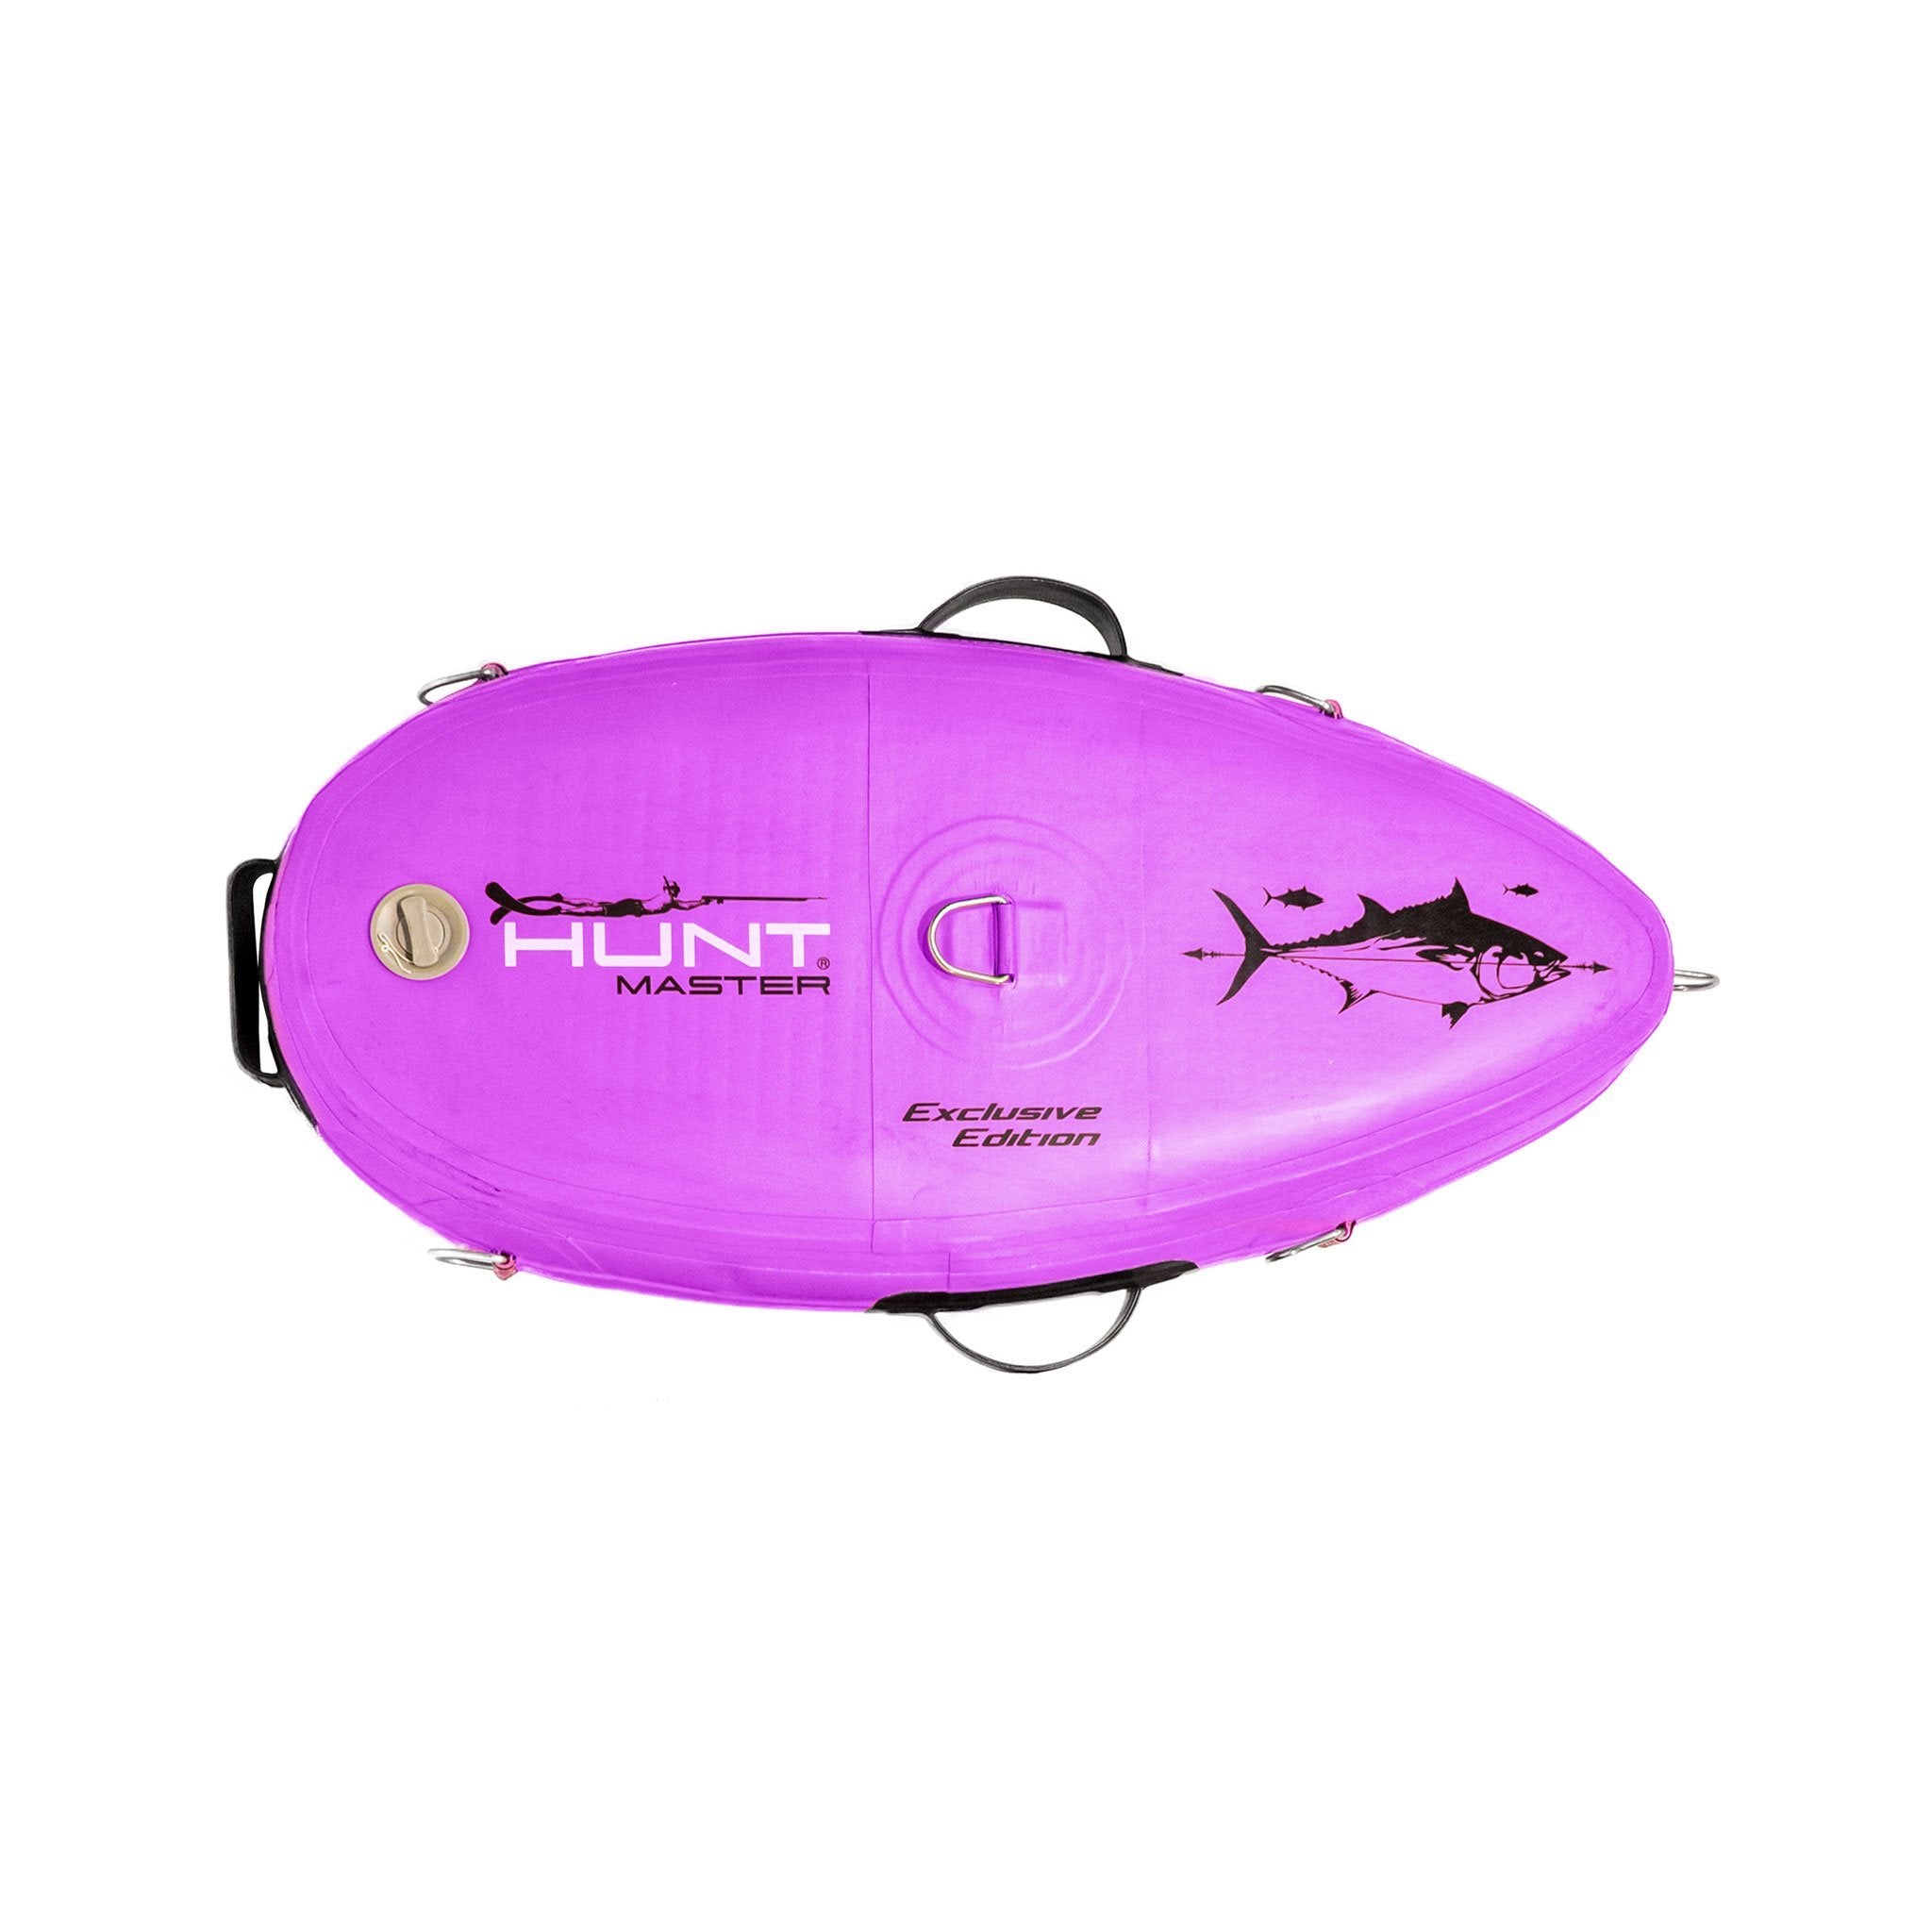 Tuna Tamer PVC Float - Exclusive Edition - Large - 98cm